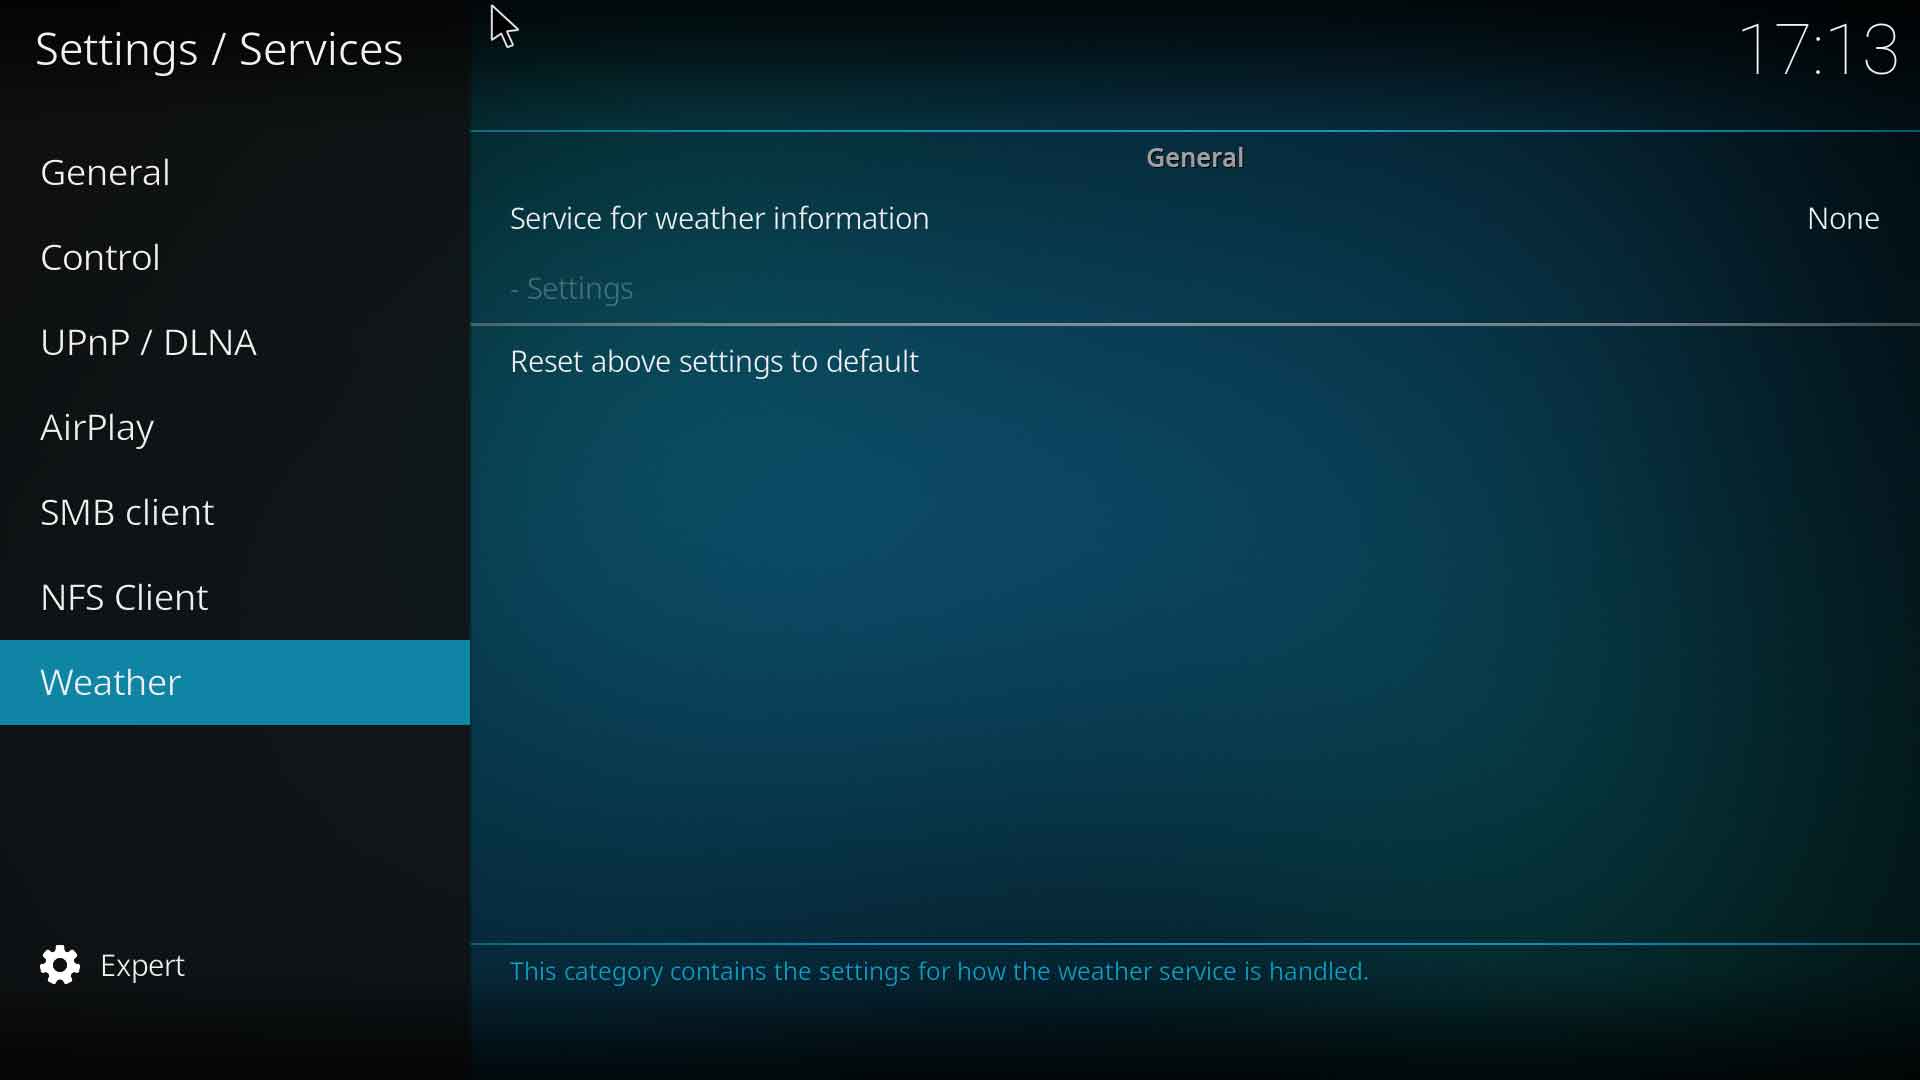 [Image 1] Start by navigating to the Settings ▶ Services ▶ Weather screen